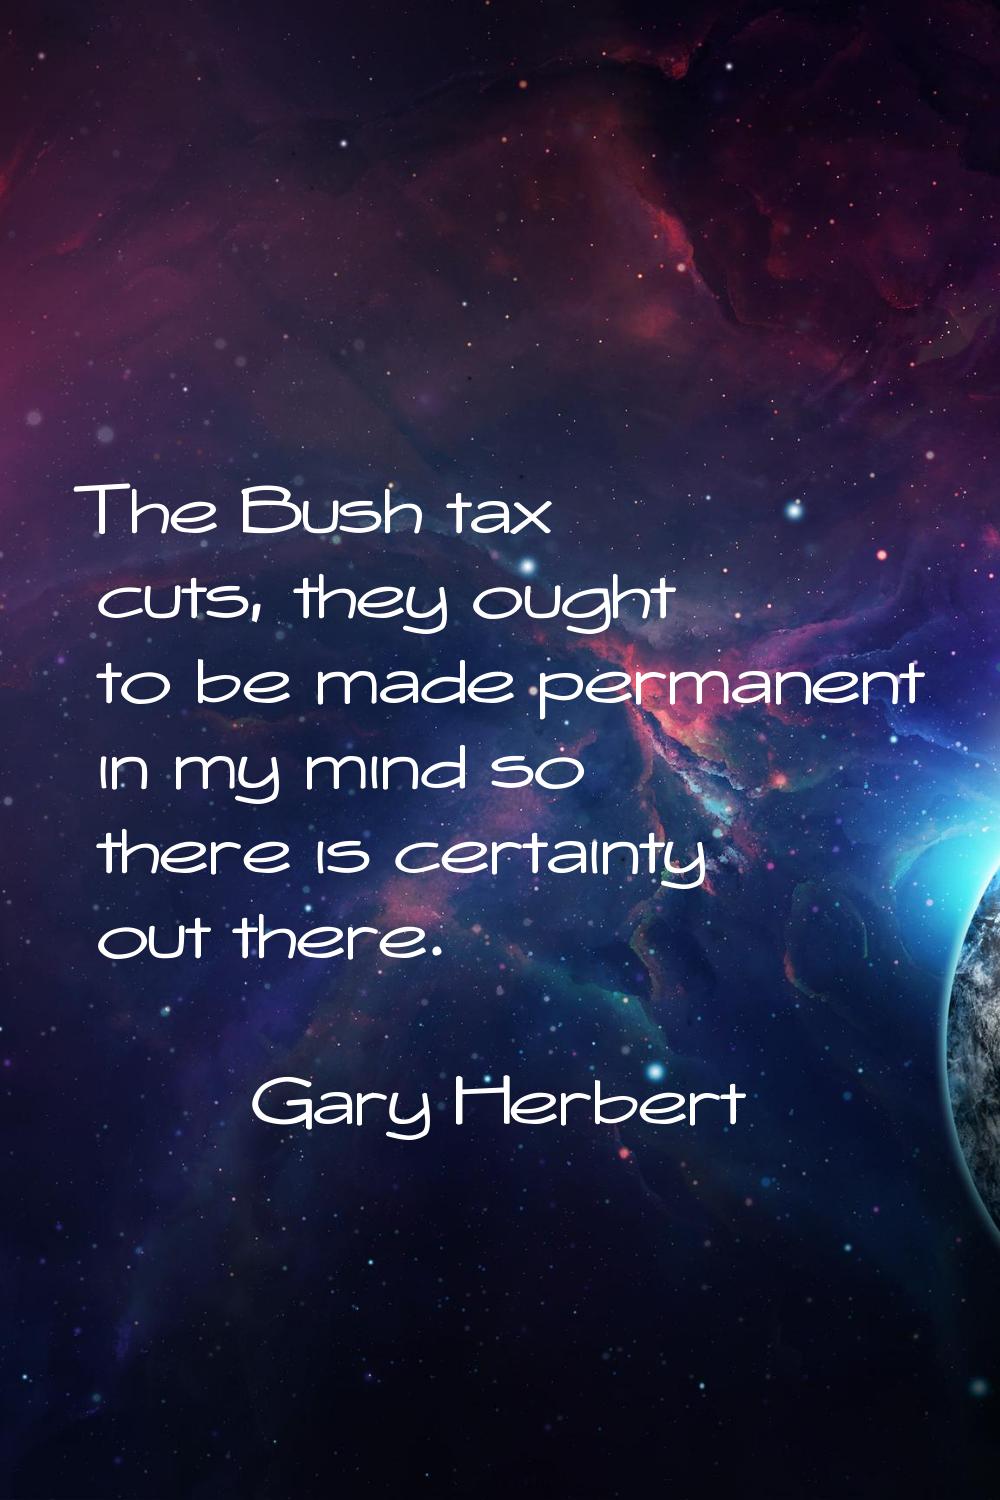 The Bush tax cuts, they ought to be made permanent in my mind so there is certainty out there.